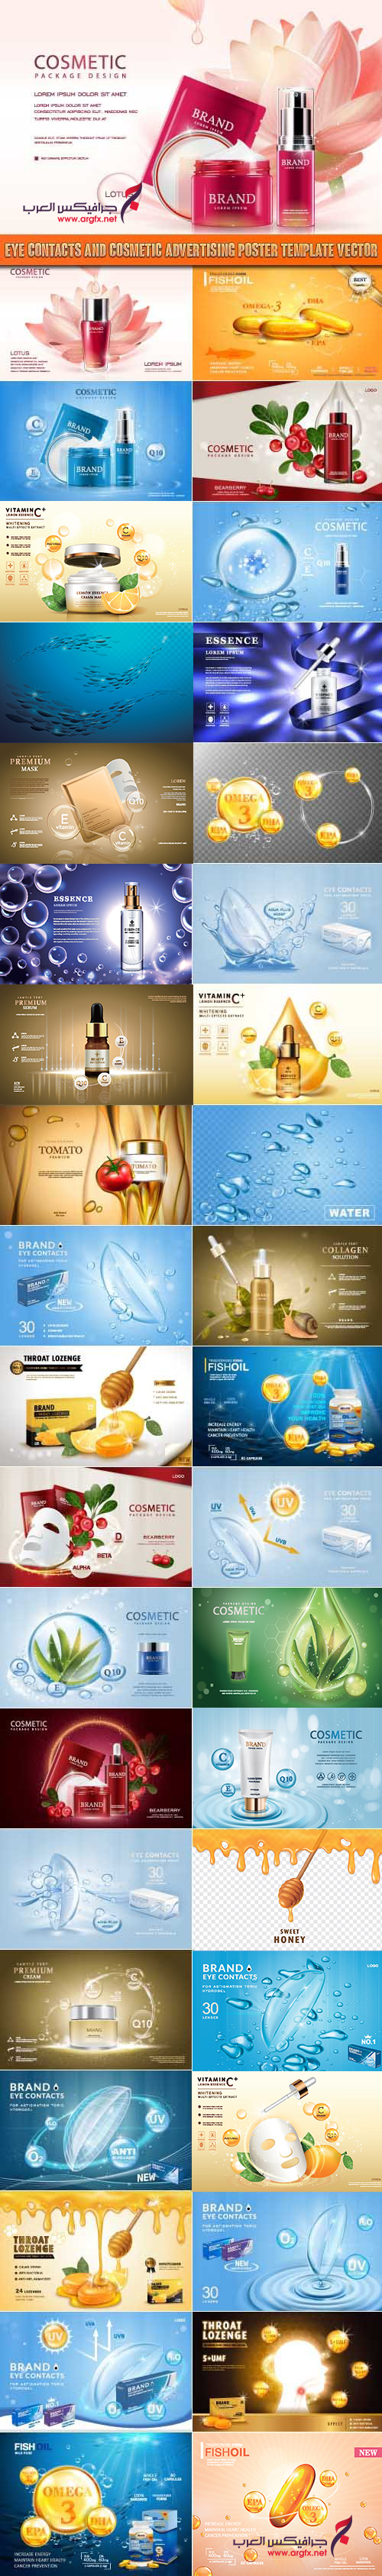 Eye contacts and Cosmetic Advertising Poster template vector